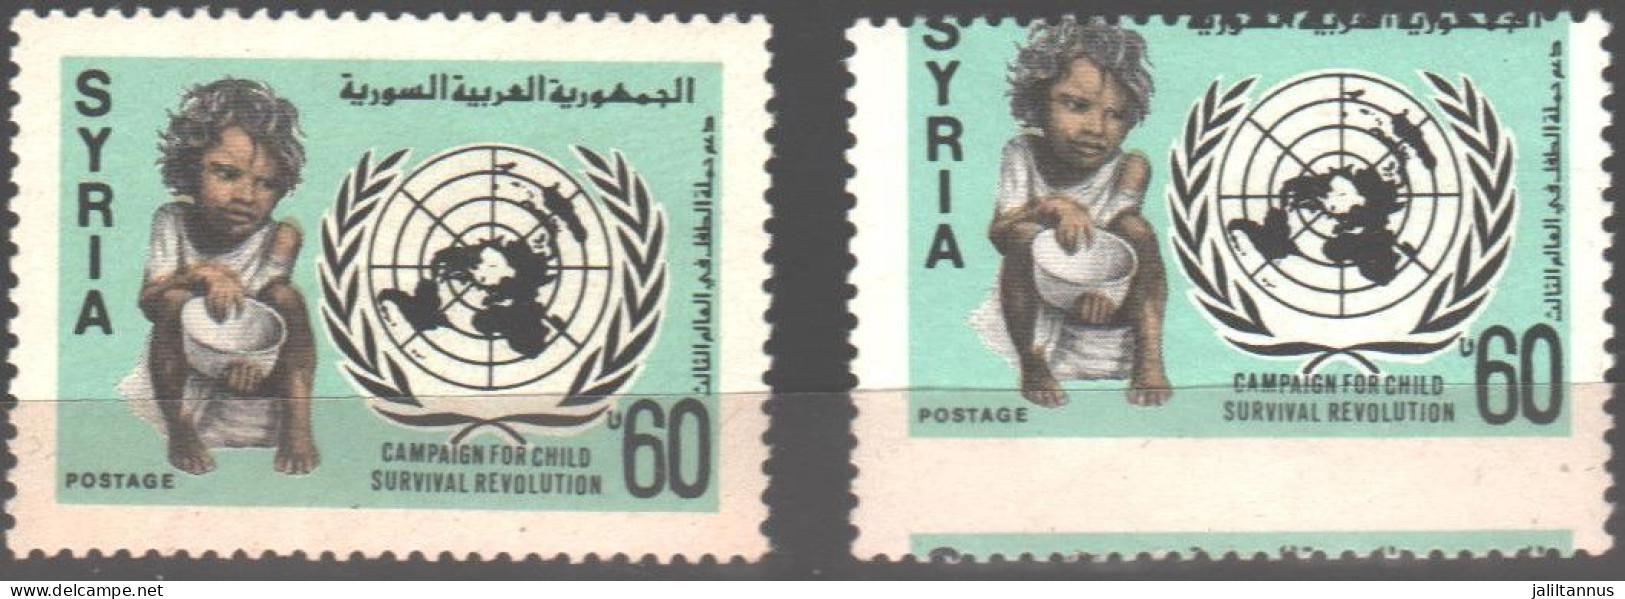 Syria - Perforation Error Set Emblem And Child With Empty Bowl 1985 Stamp For Comparison MNH - Siria